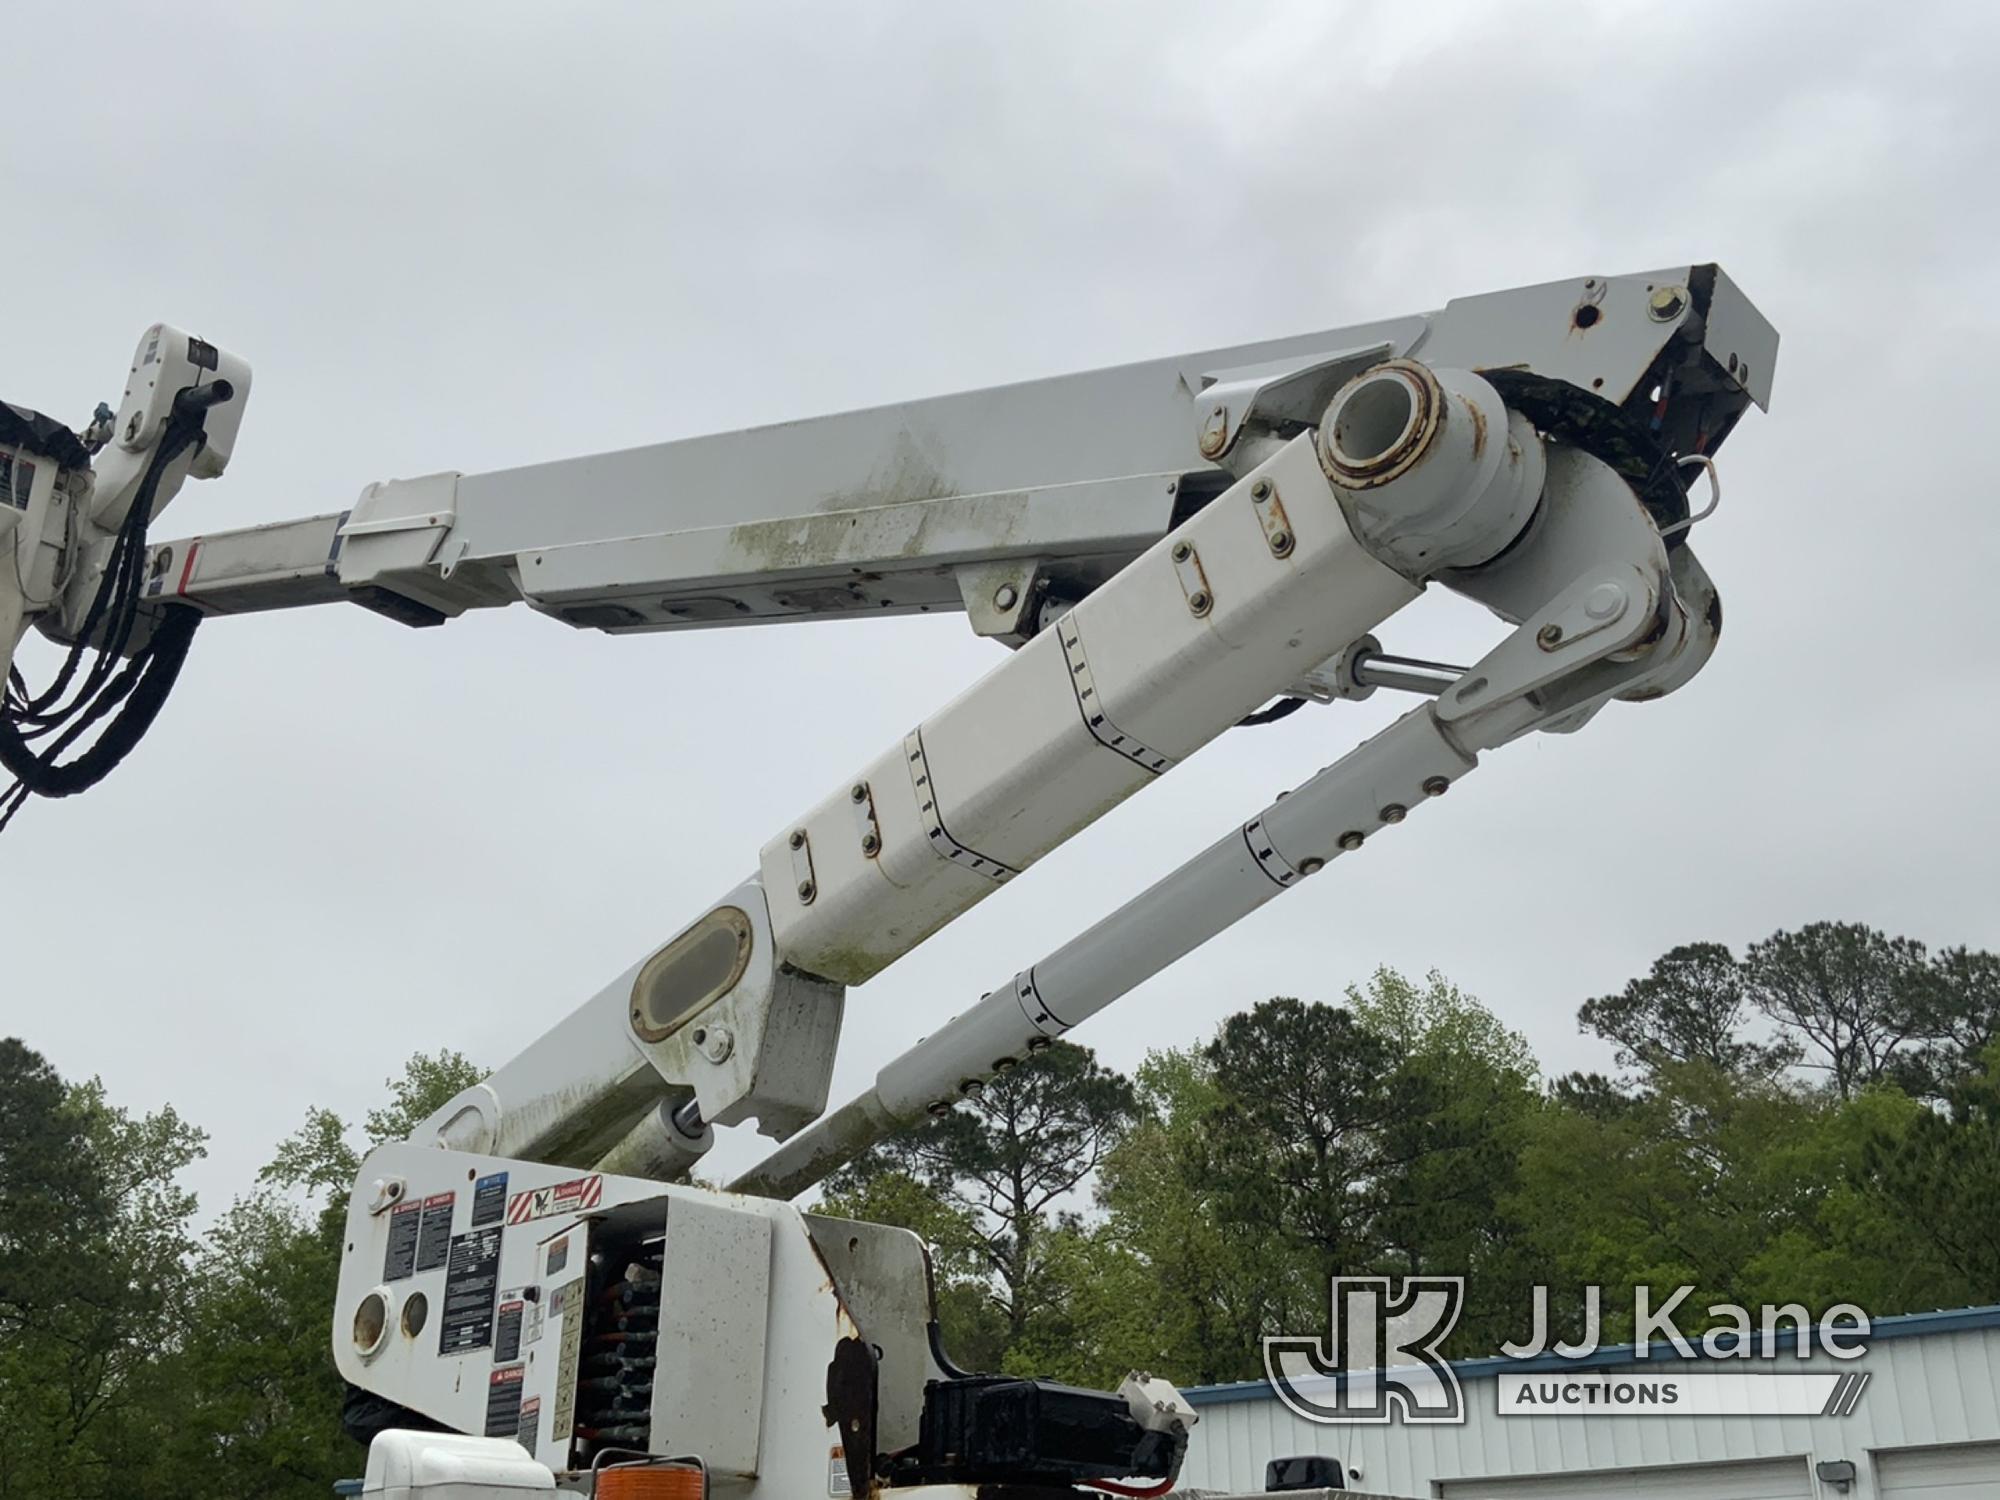 (Supply, NC) Altec AT40-MH, Articulating & Telescopic Material Handling Bucket Truck mounted behind